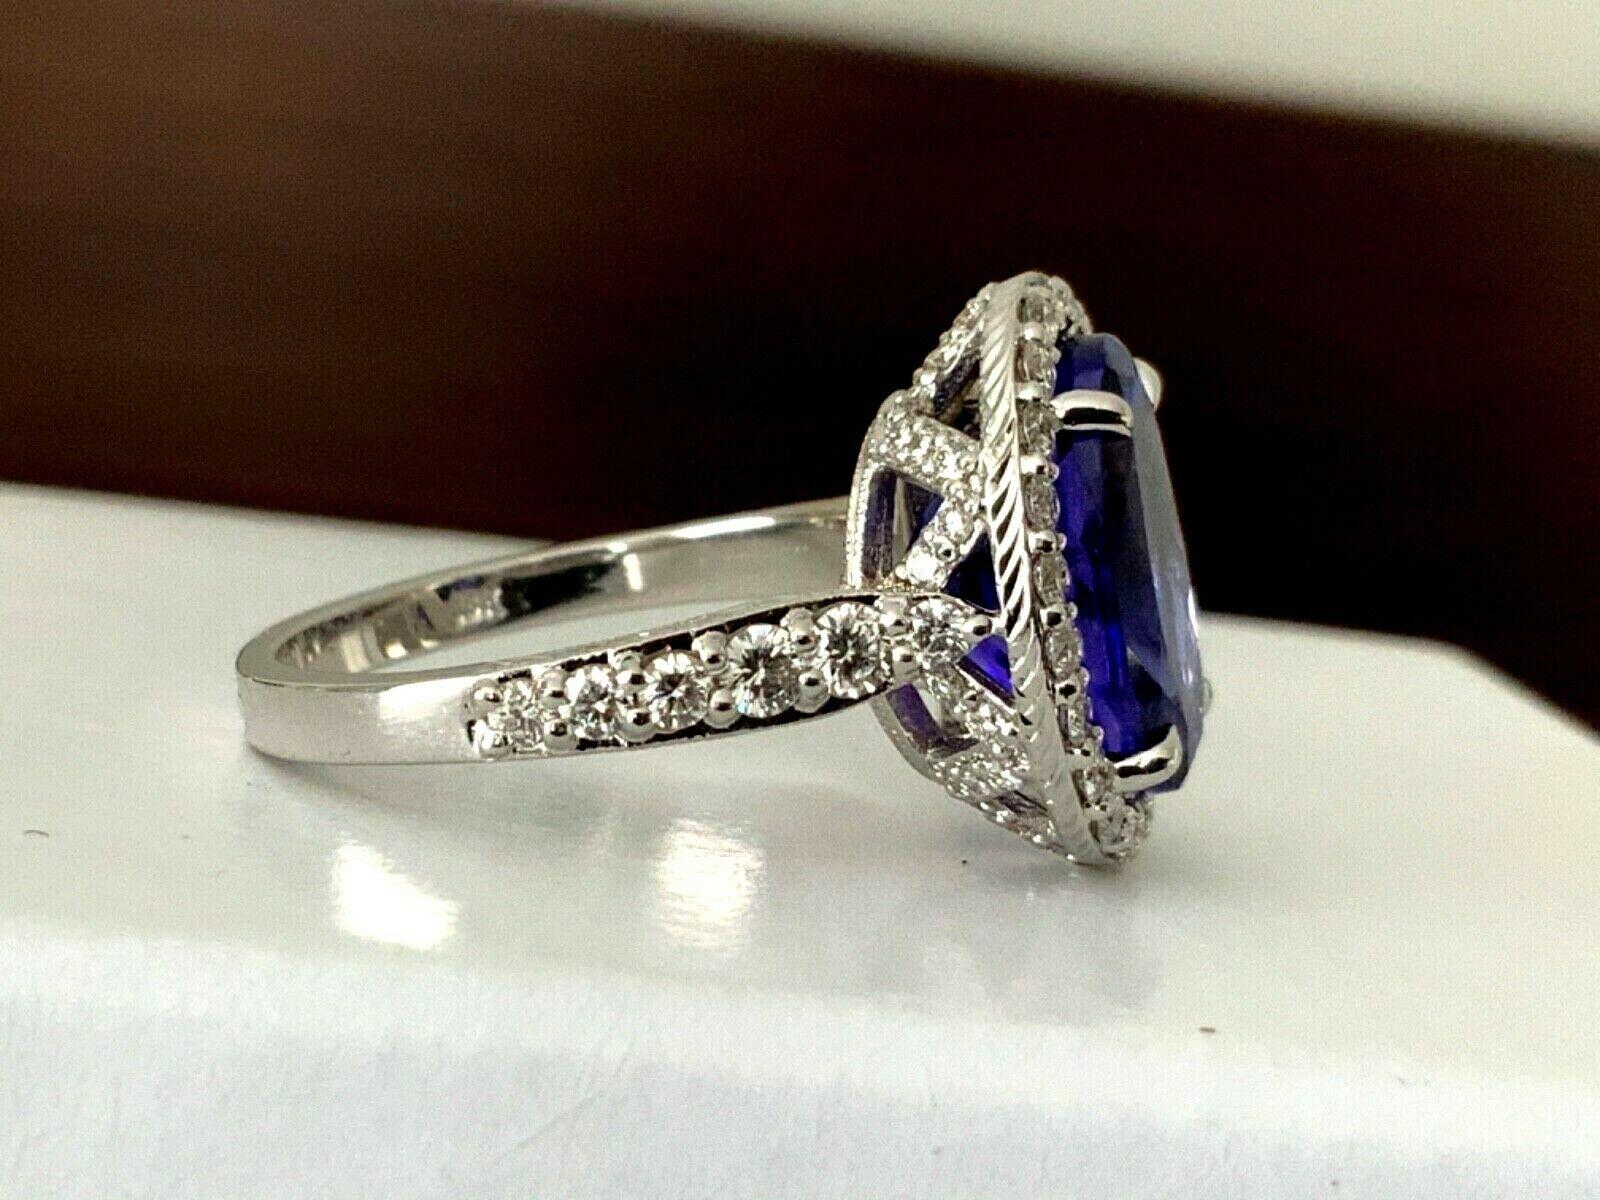 5.72 Carat Natural Oval Violet Tanzanite and Diamond Ring Platinum GIA Certified For Sale 5